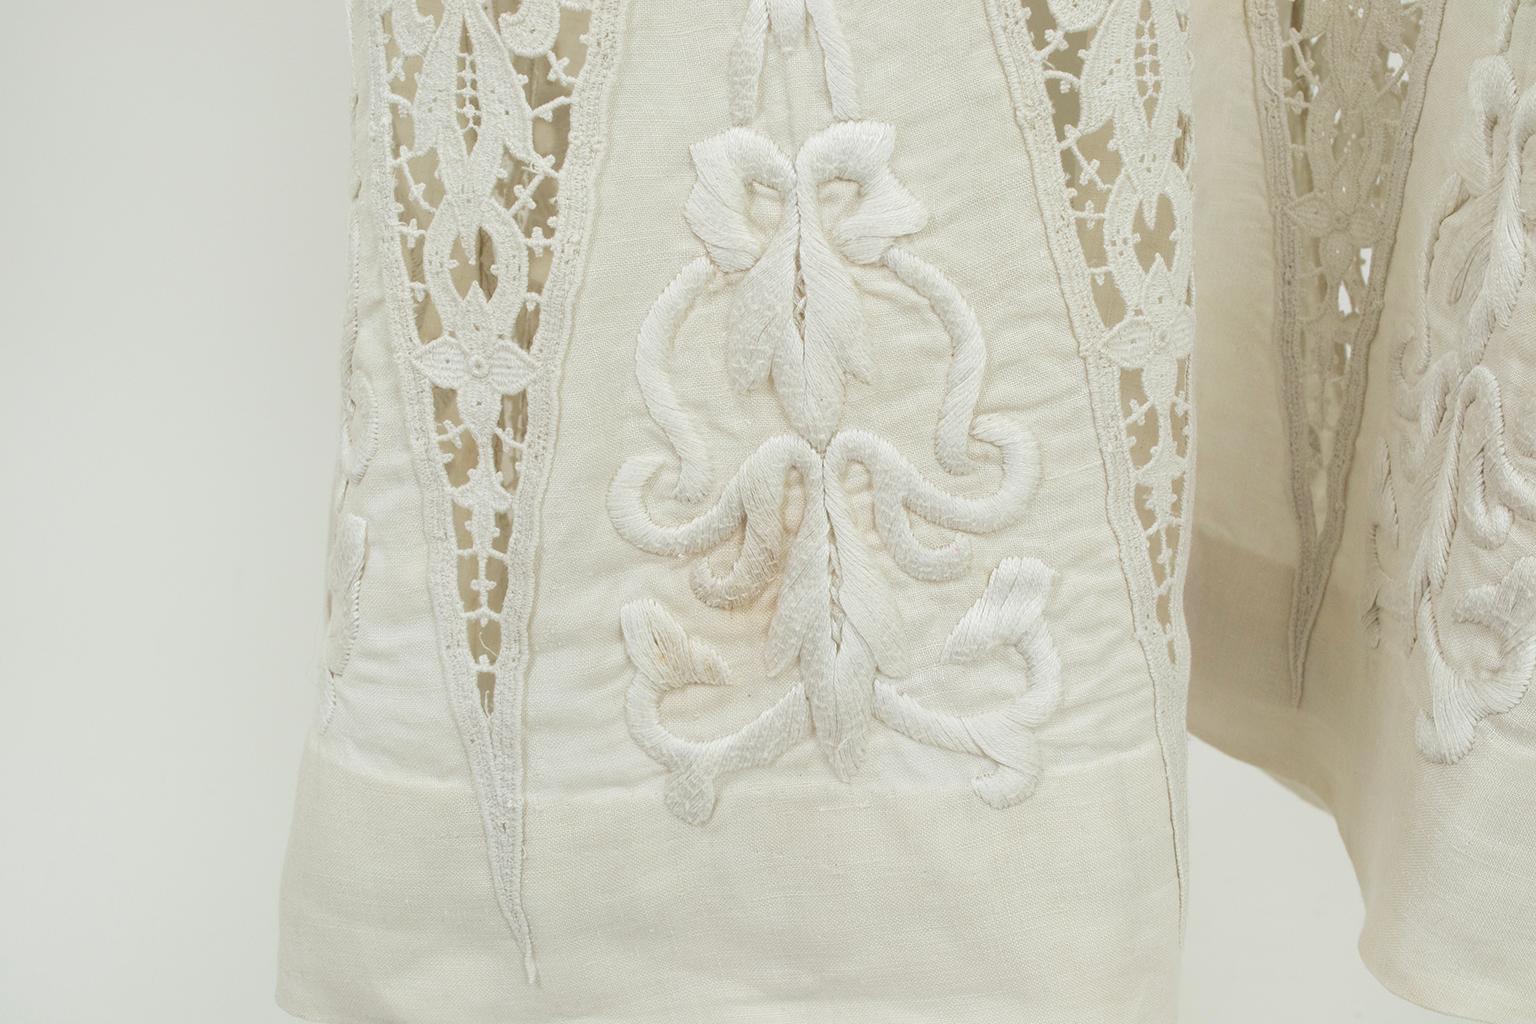 Edwardian White Irish Crochet and Cotton Walking or Wedding Suit – L, 1900s For Sale 14